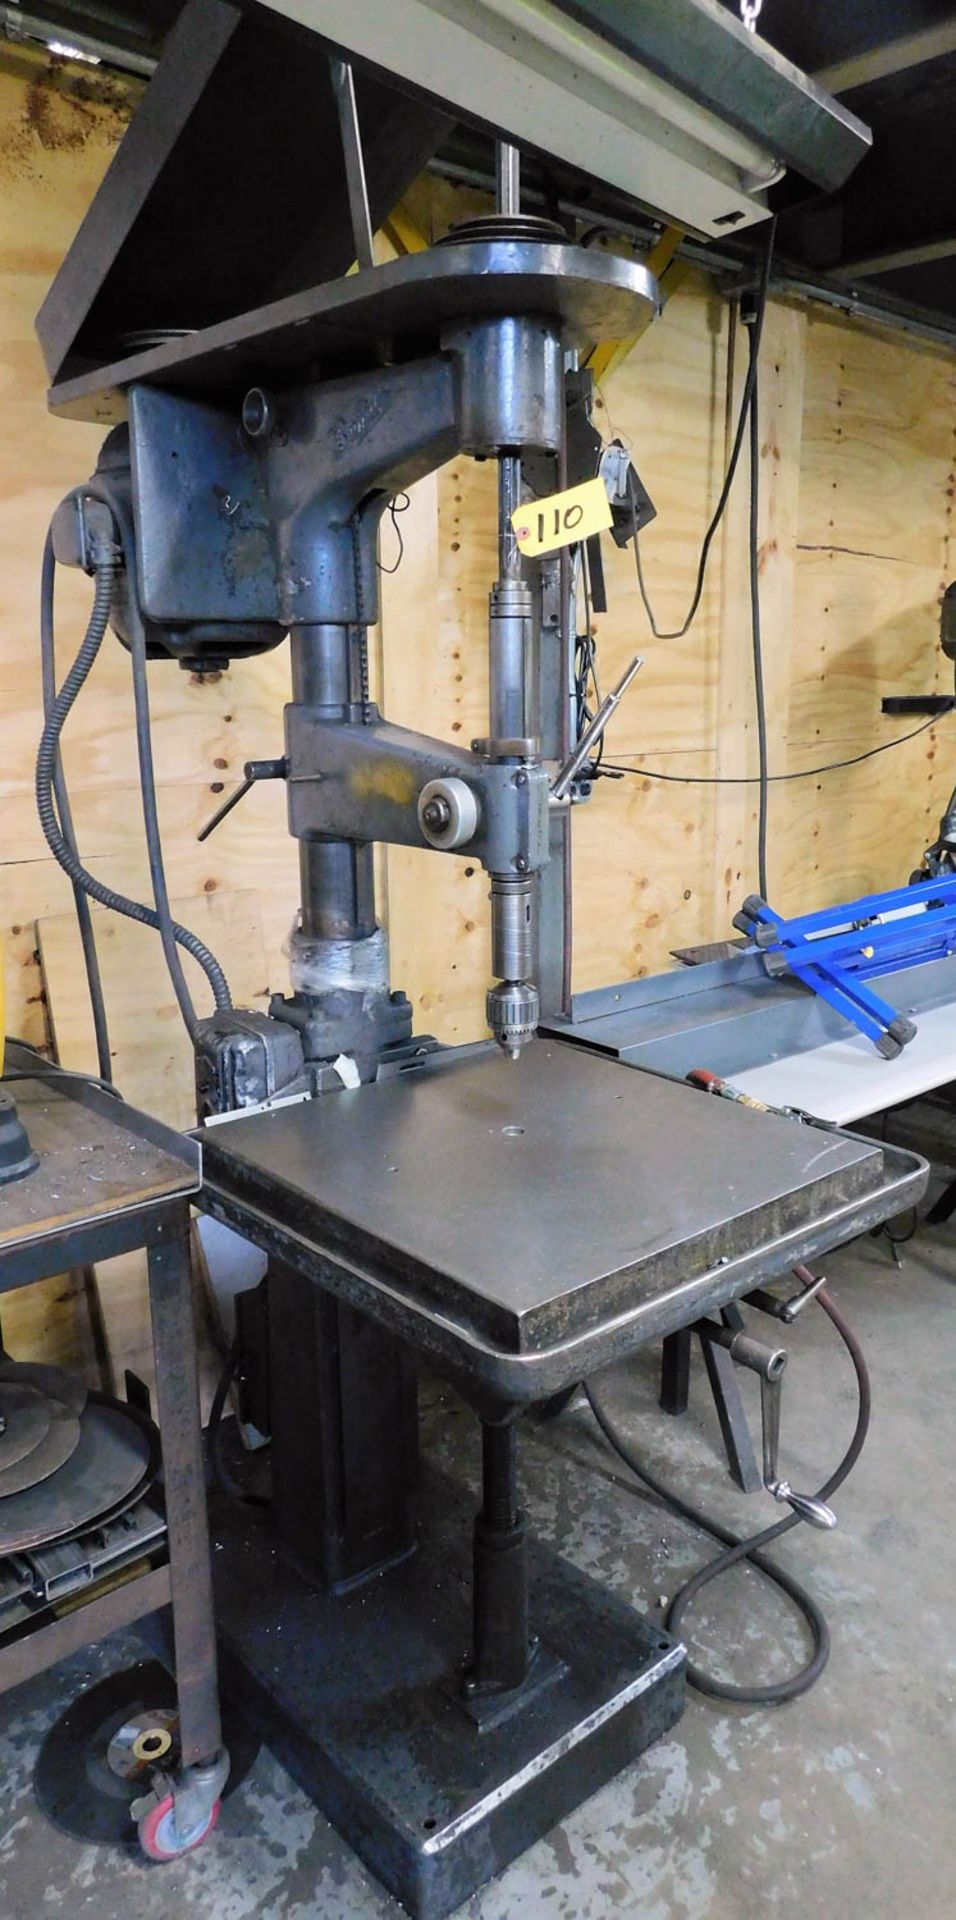 BUFFALO 24" FLOOR TYPE DRILL PRESS WITH 22" X 23" TABLE